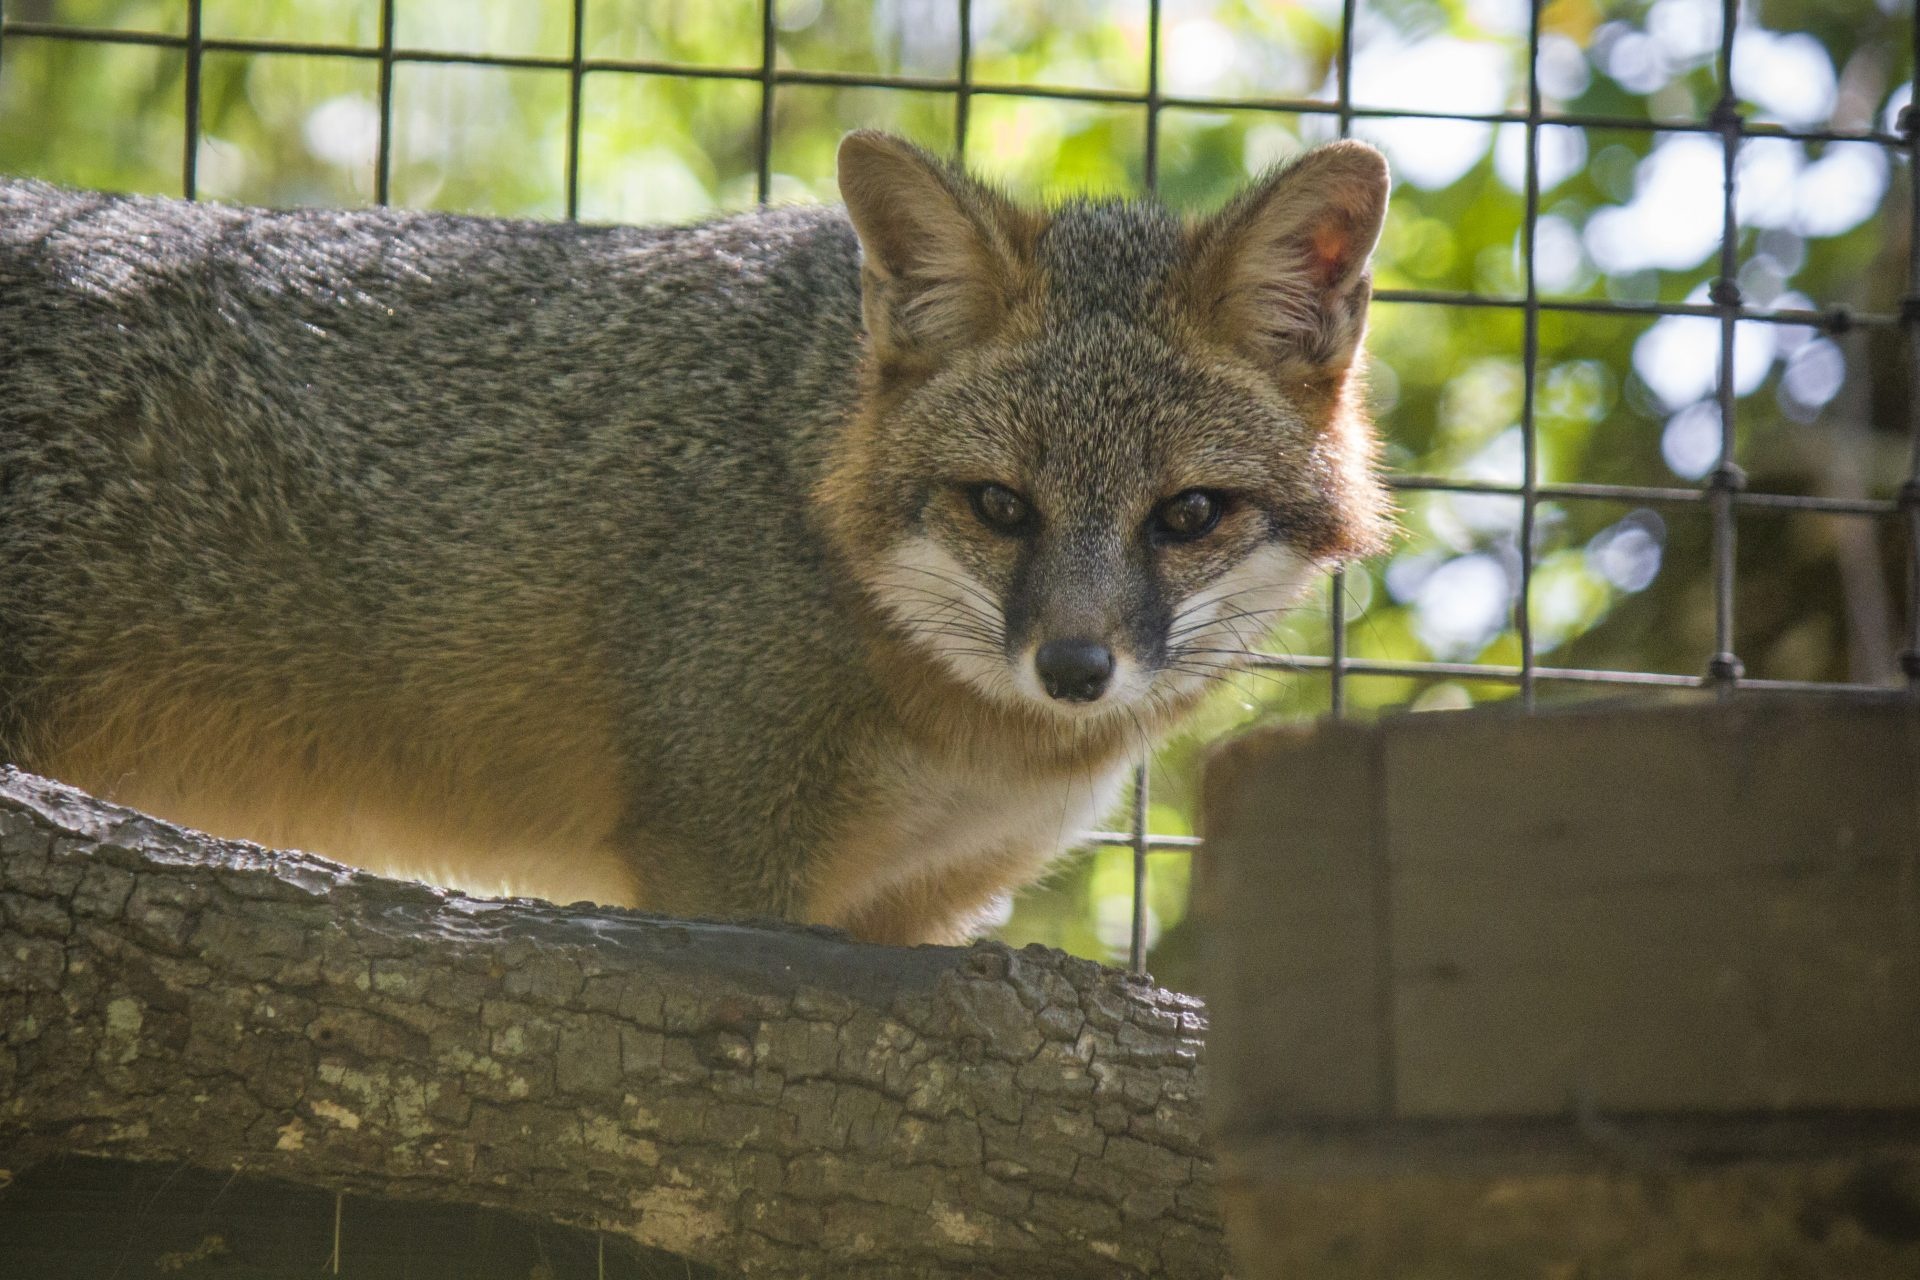 Gray Fox: Habitat, Rocky canyons and ridges, Omnivore, Eating a wide variety of foods. 1920x1280 HD Wallpaper.